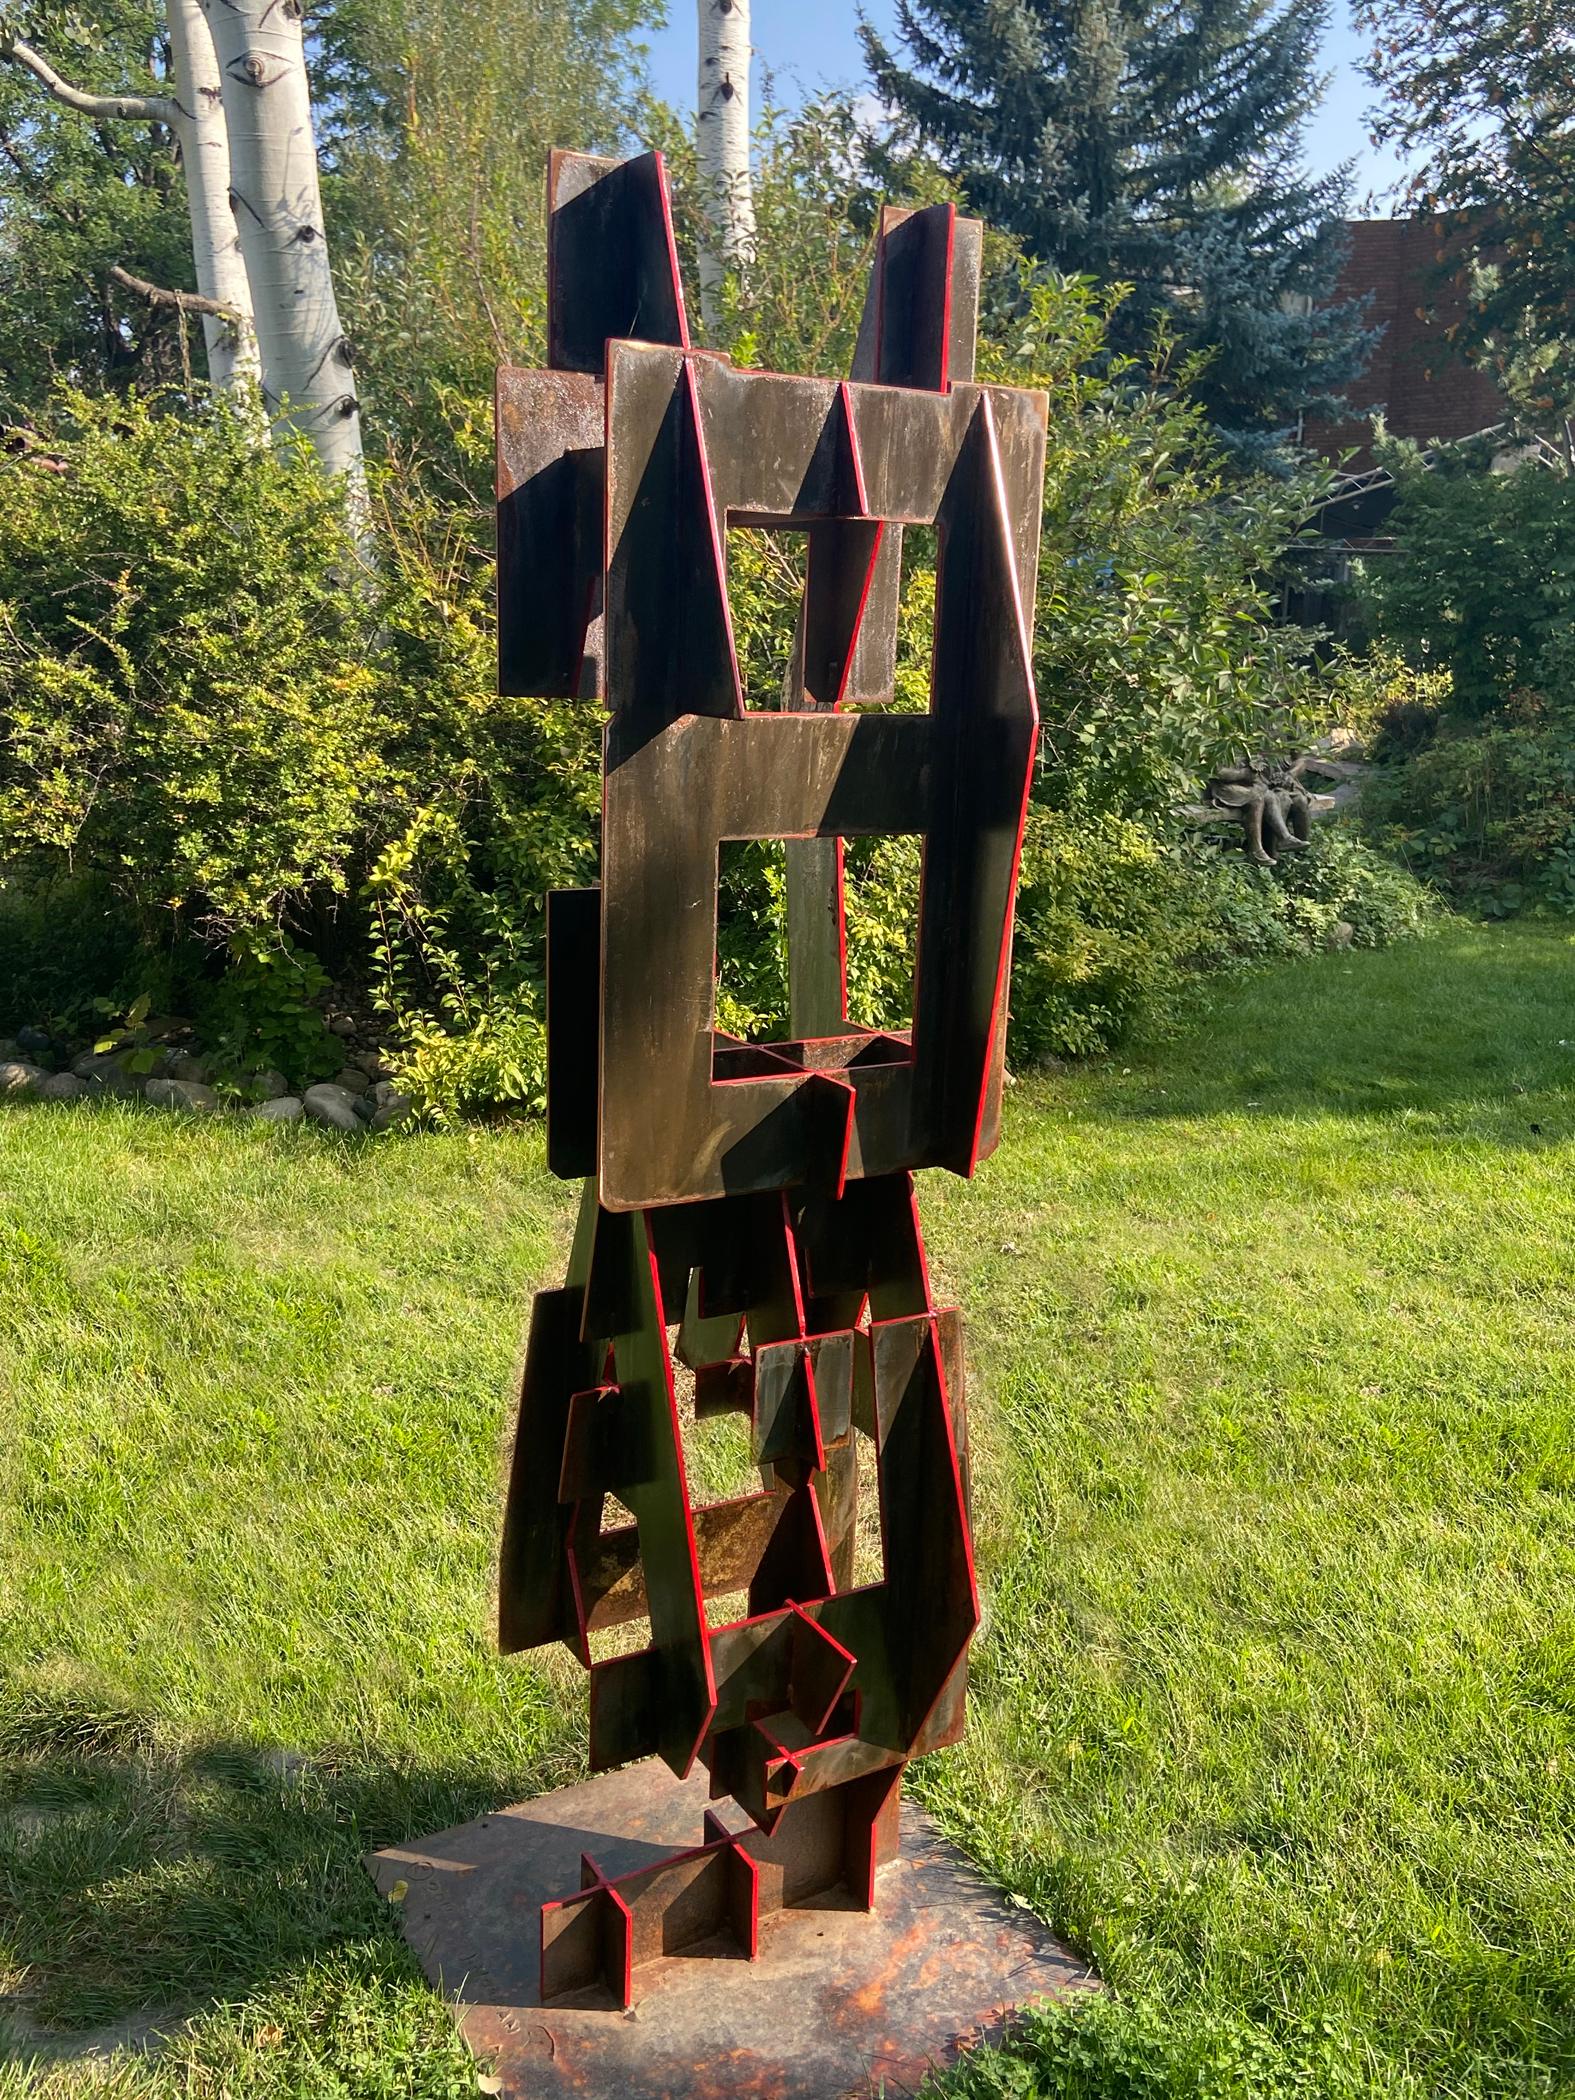 Home / Away by Joe Norman
Word Play Garden Size Sculpture
Painted Steel finished with Clear Coat. 72x28x28